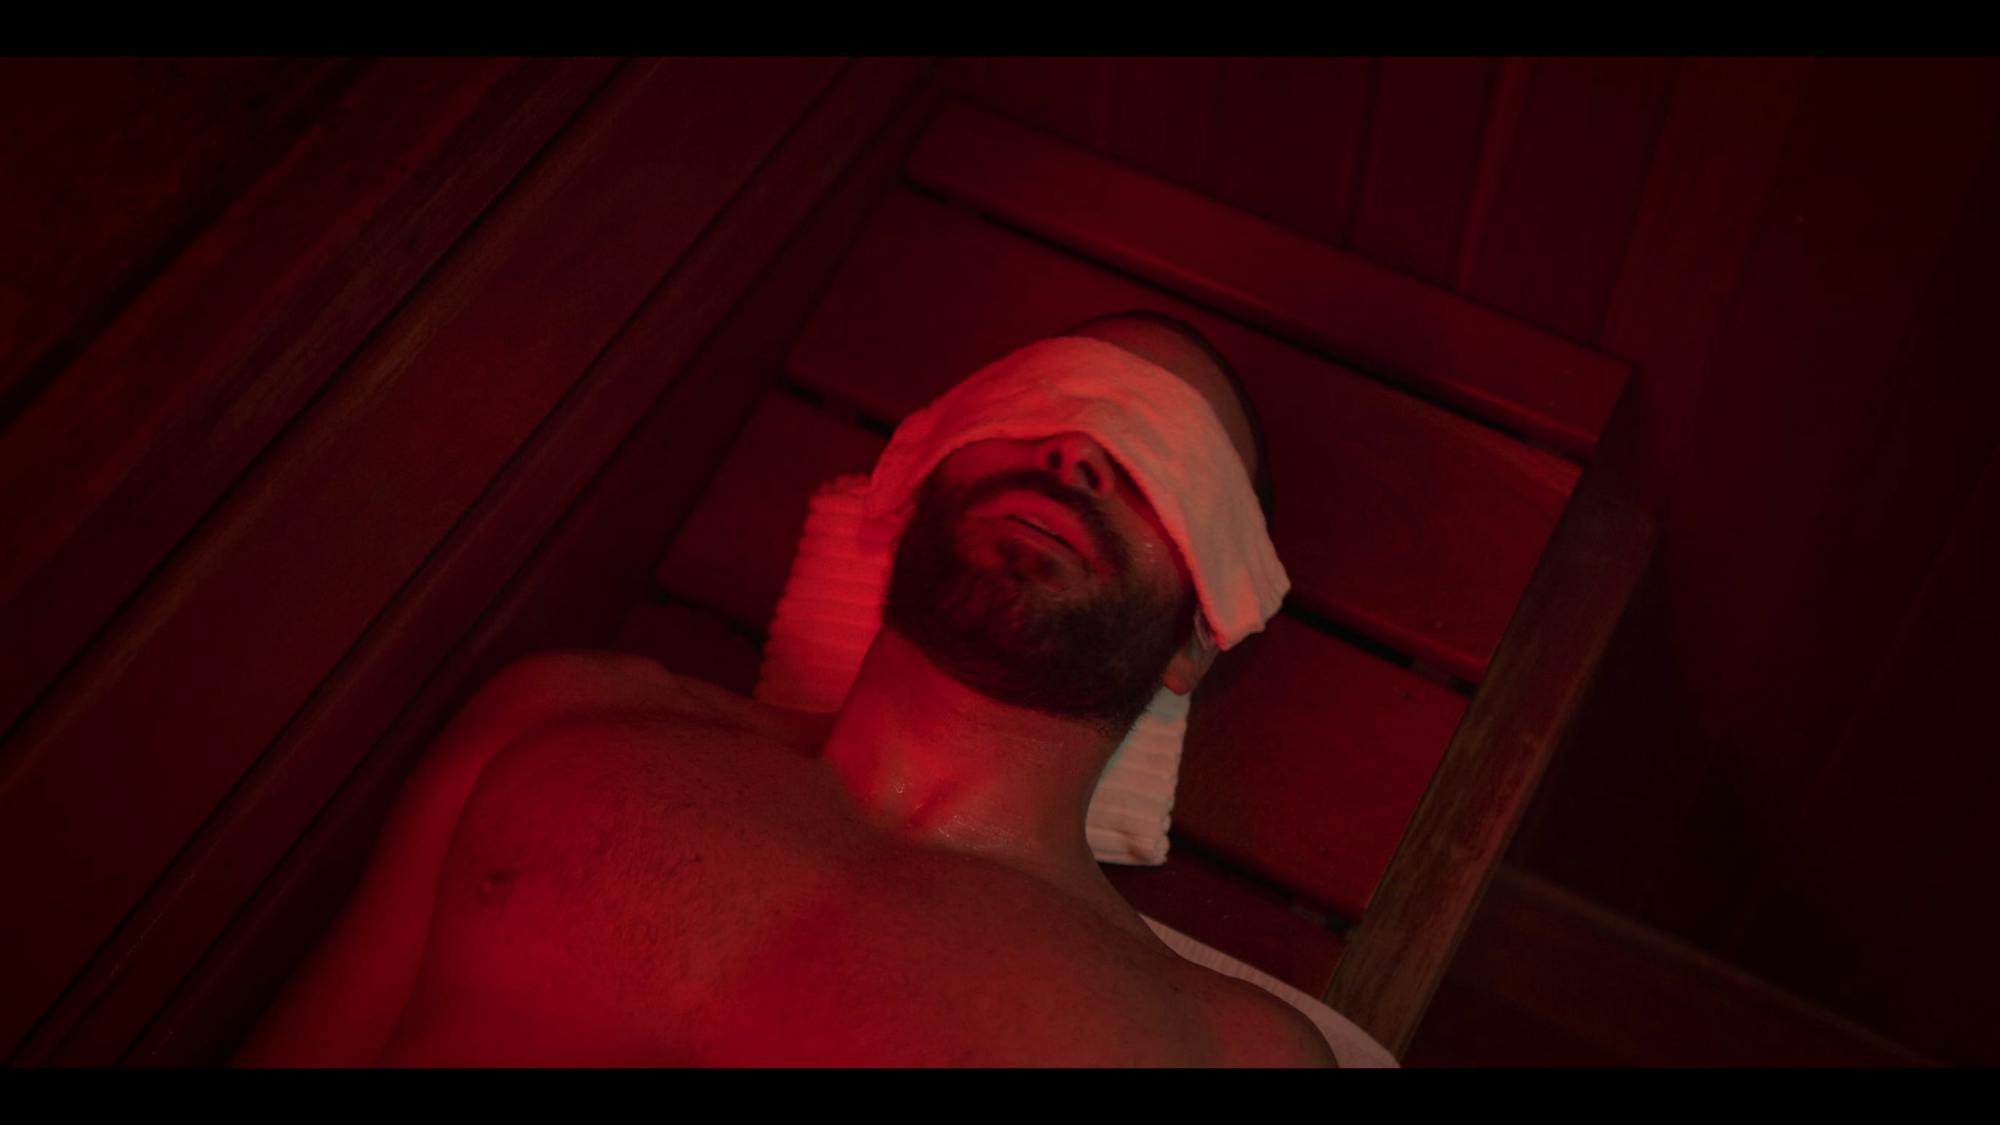 Rodolfo (Alejandro Nones) lies on a wooden bench in the sauna with a towel over his eyes and behind his head. The red lighting sets an ominous glow.